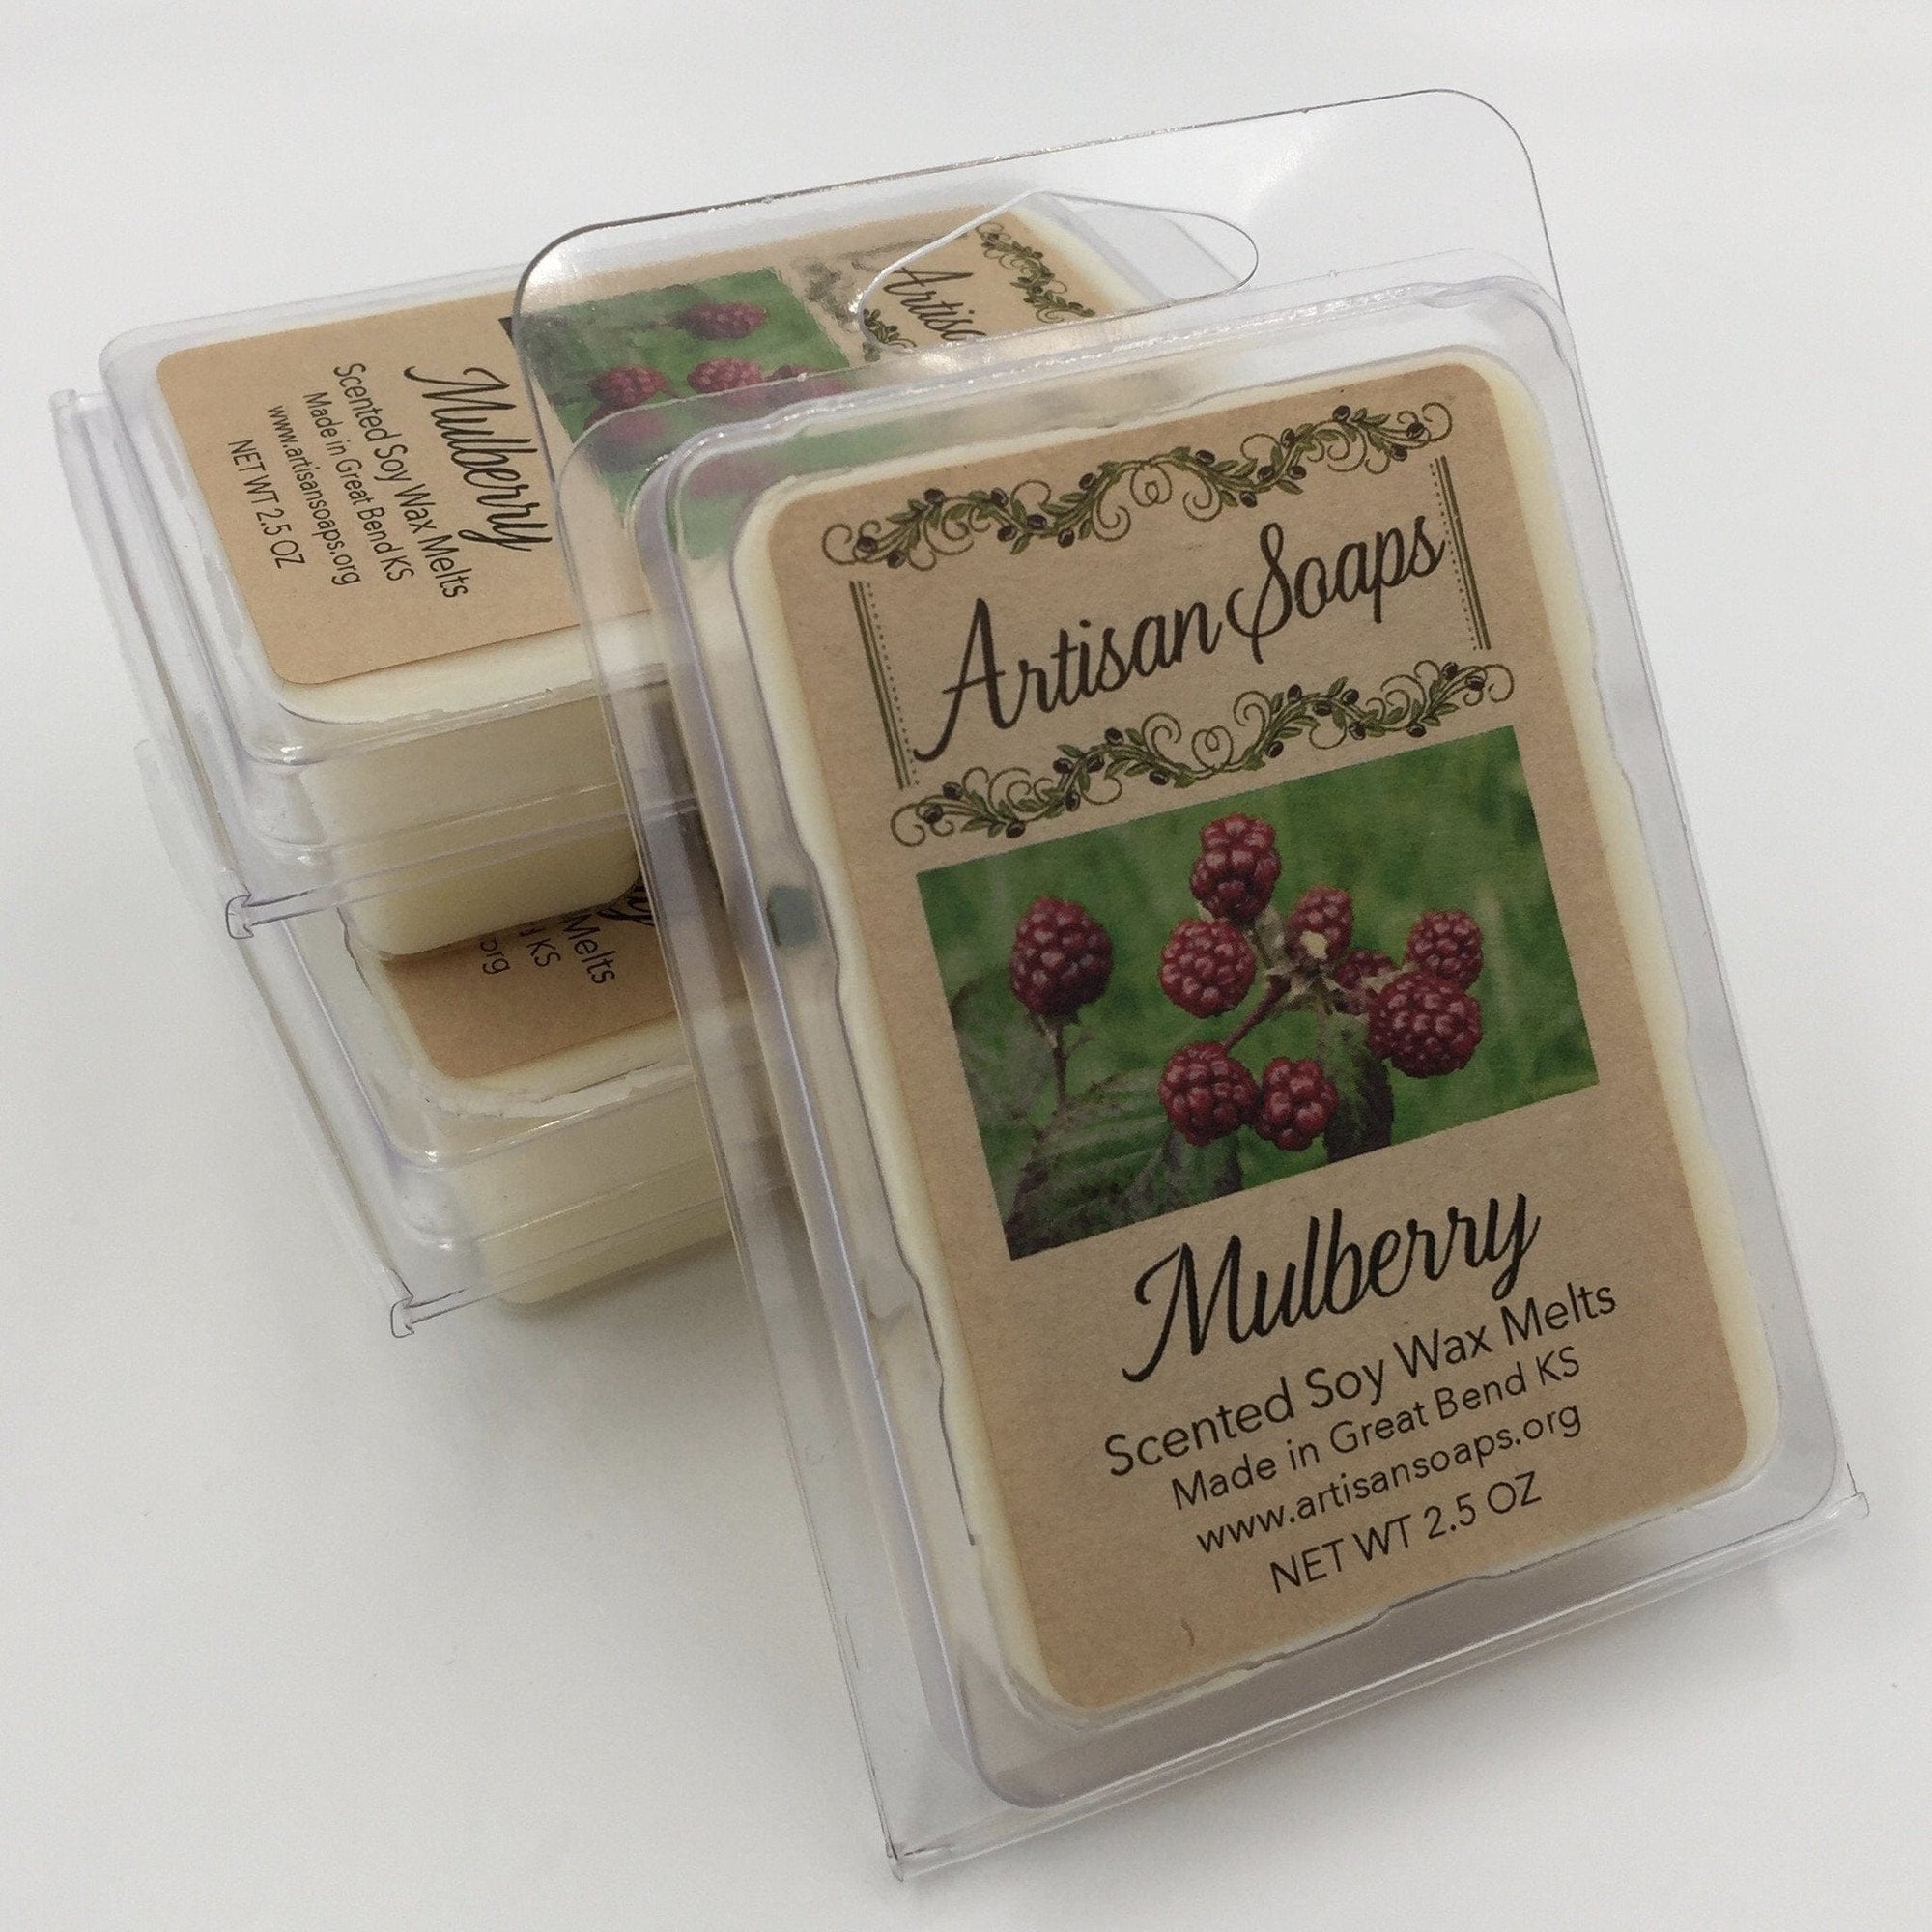 Mulberry Soy Wax Melt - Artisan Soaps